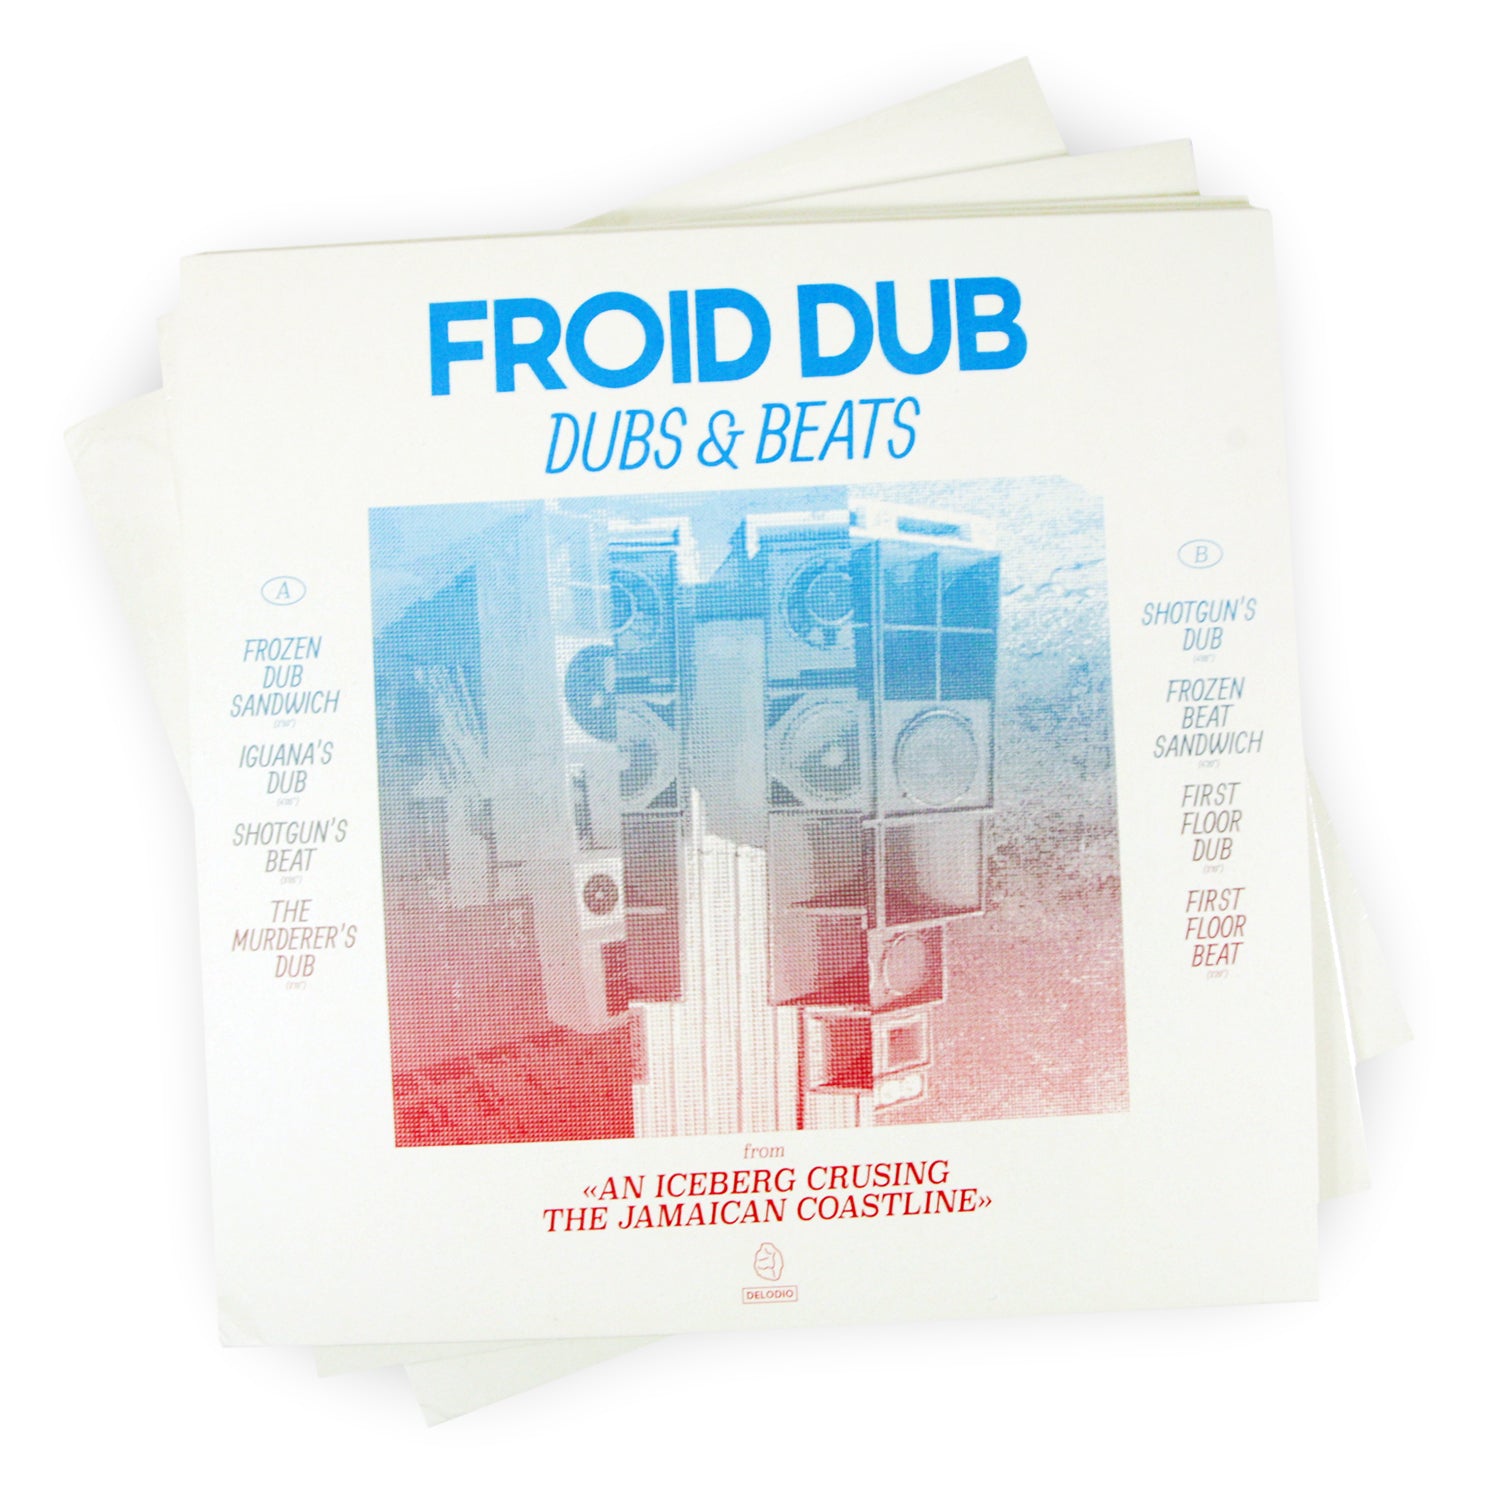 Froid-dub